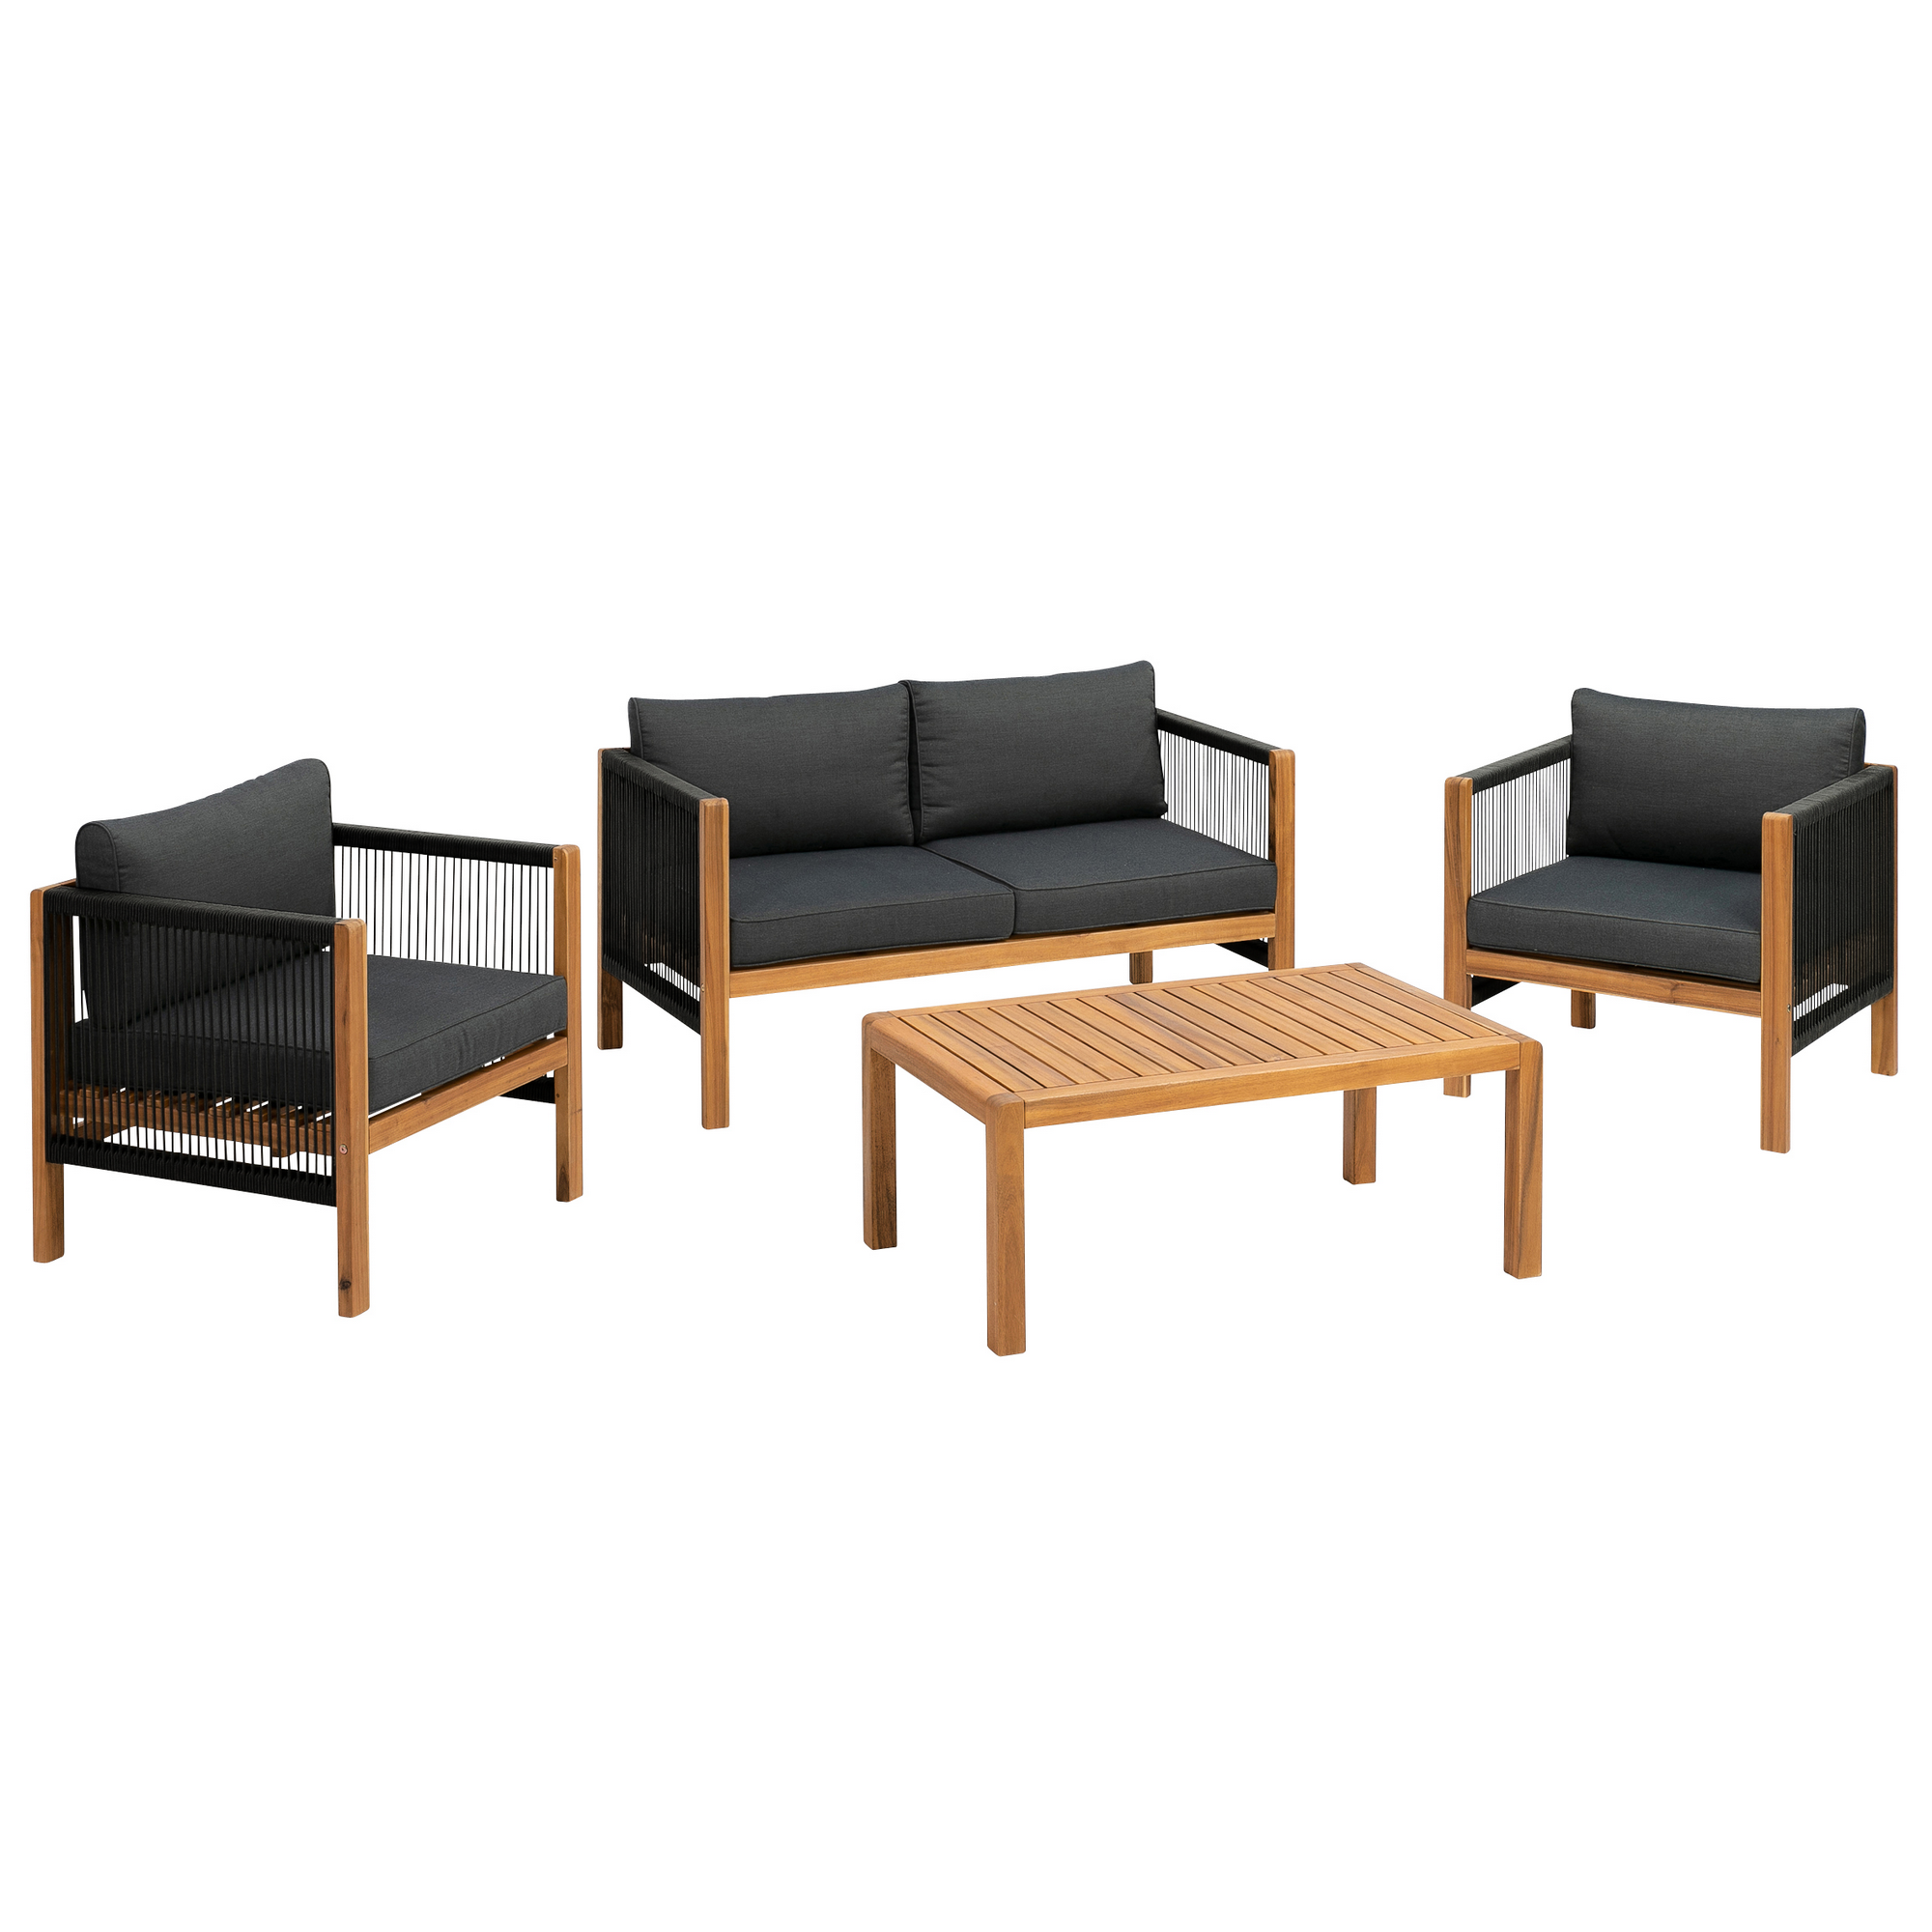 Lounge-Set 'Jette' braun/anthrazit, 4-teilig + product picture